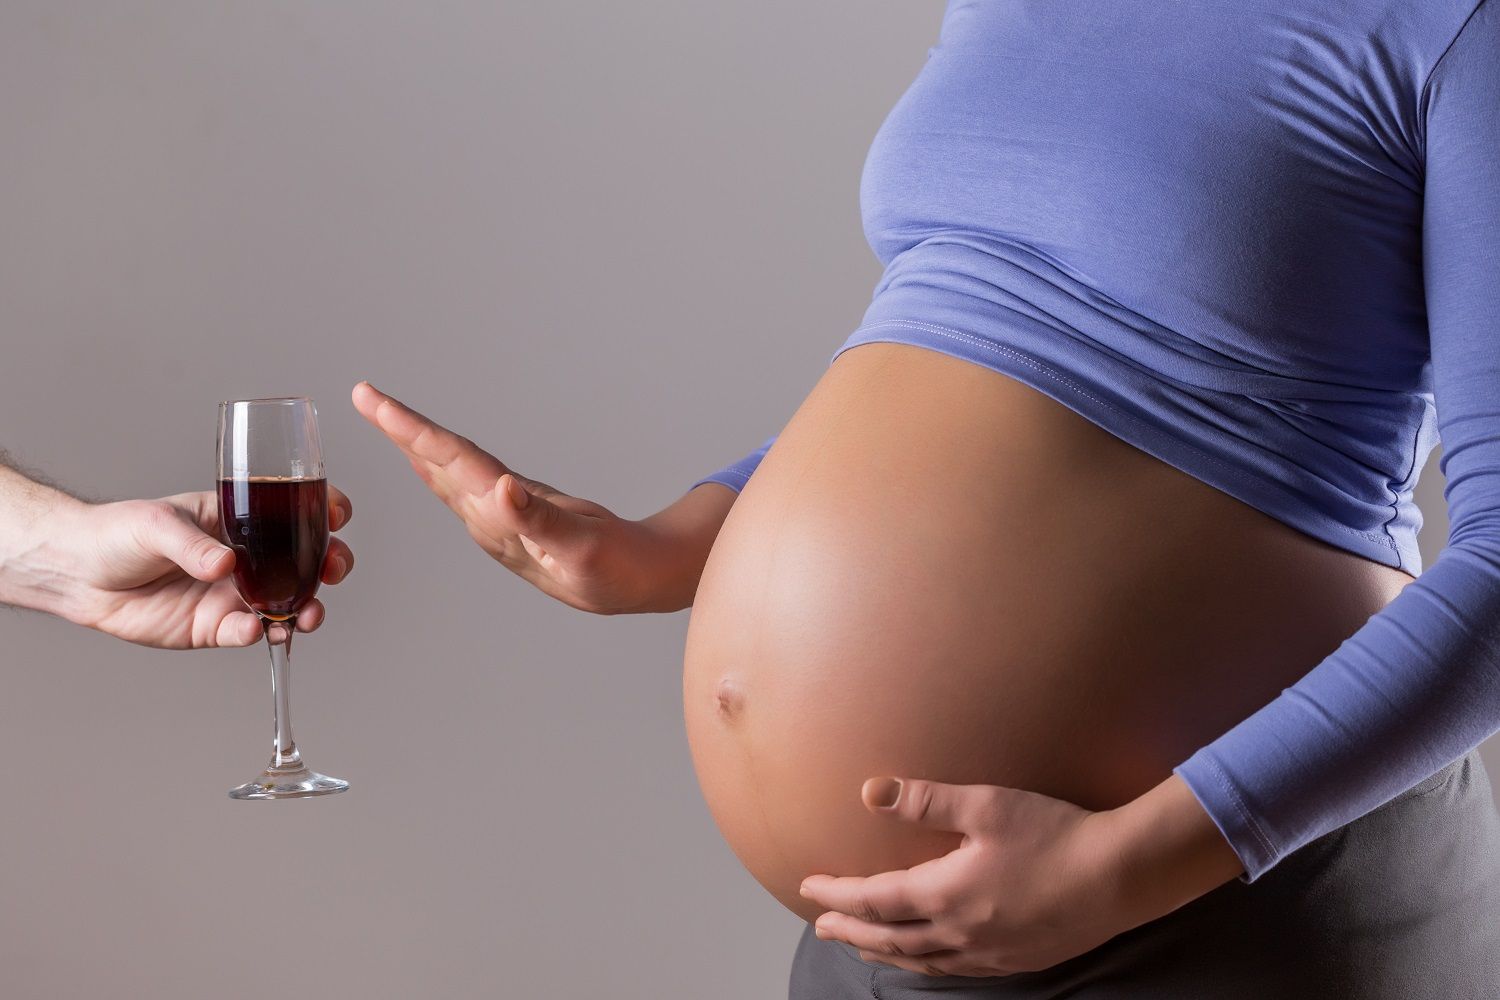 Can I drink while I'm pregnant?